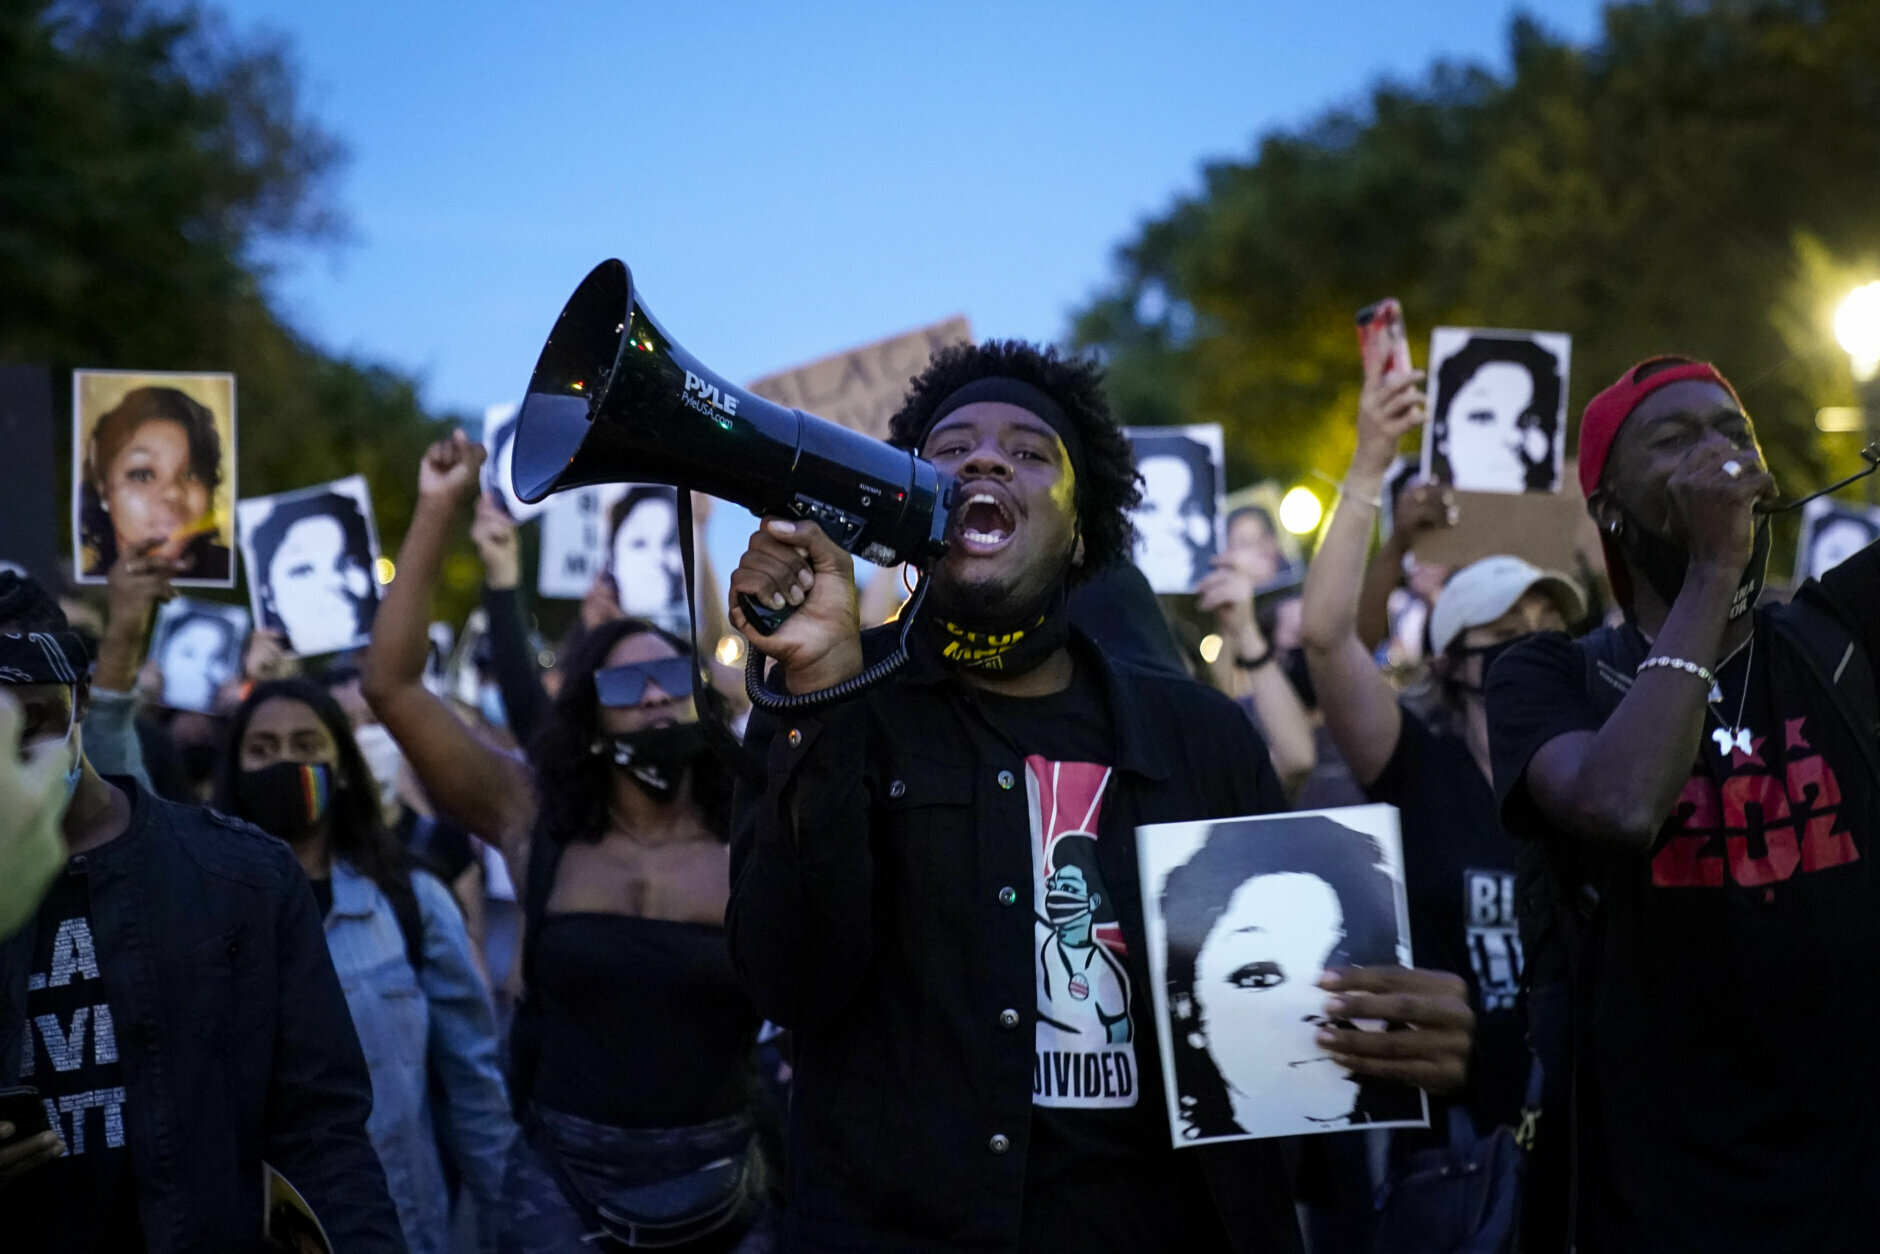 WASHINGTON, DC - SEPTEMBER 23: Demonstrators march along Constitution Avenue in protest following a Kentucky grand jury decision in the Breonna Taylor case on September 23, 2020 in Washington, DC. A Kentucky grand jury indicted one police officer involved in the shooting of Breonna Taylor with 3 counts of wanton endangerment. No officers were indicted on charges in connection to Taylor's death. (Photo by Drew Angerer/Getty Images)